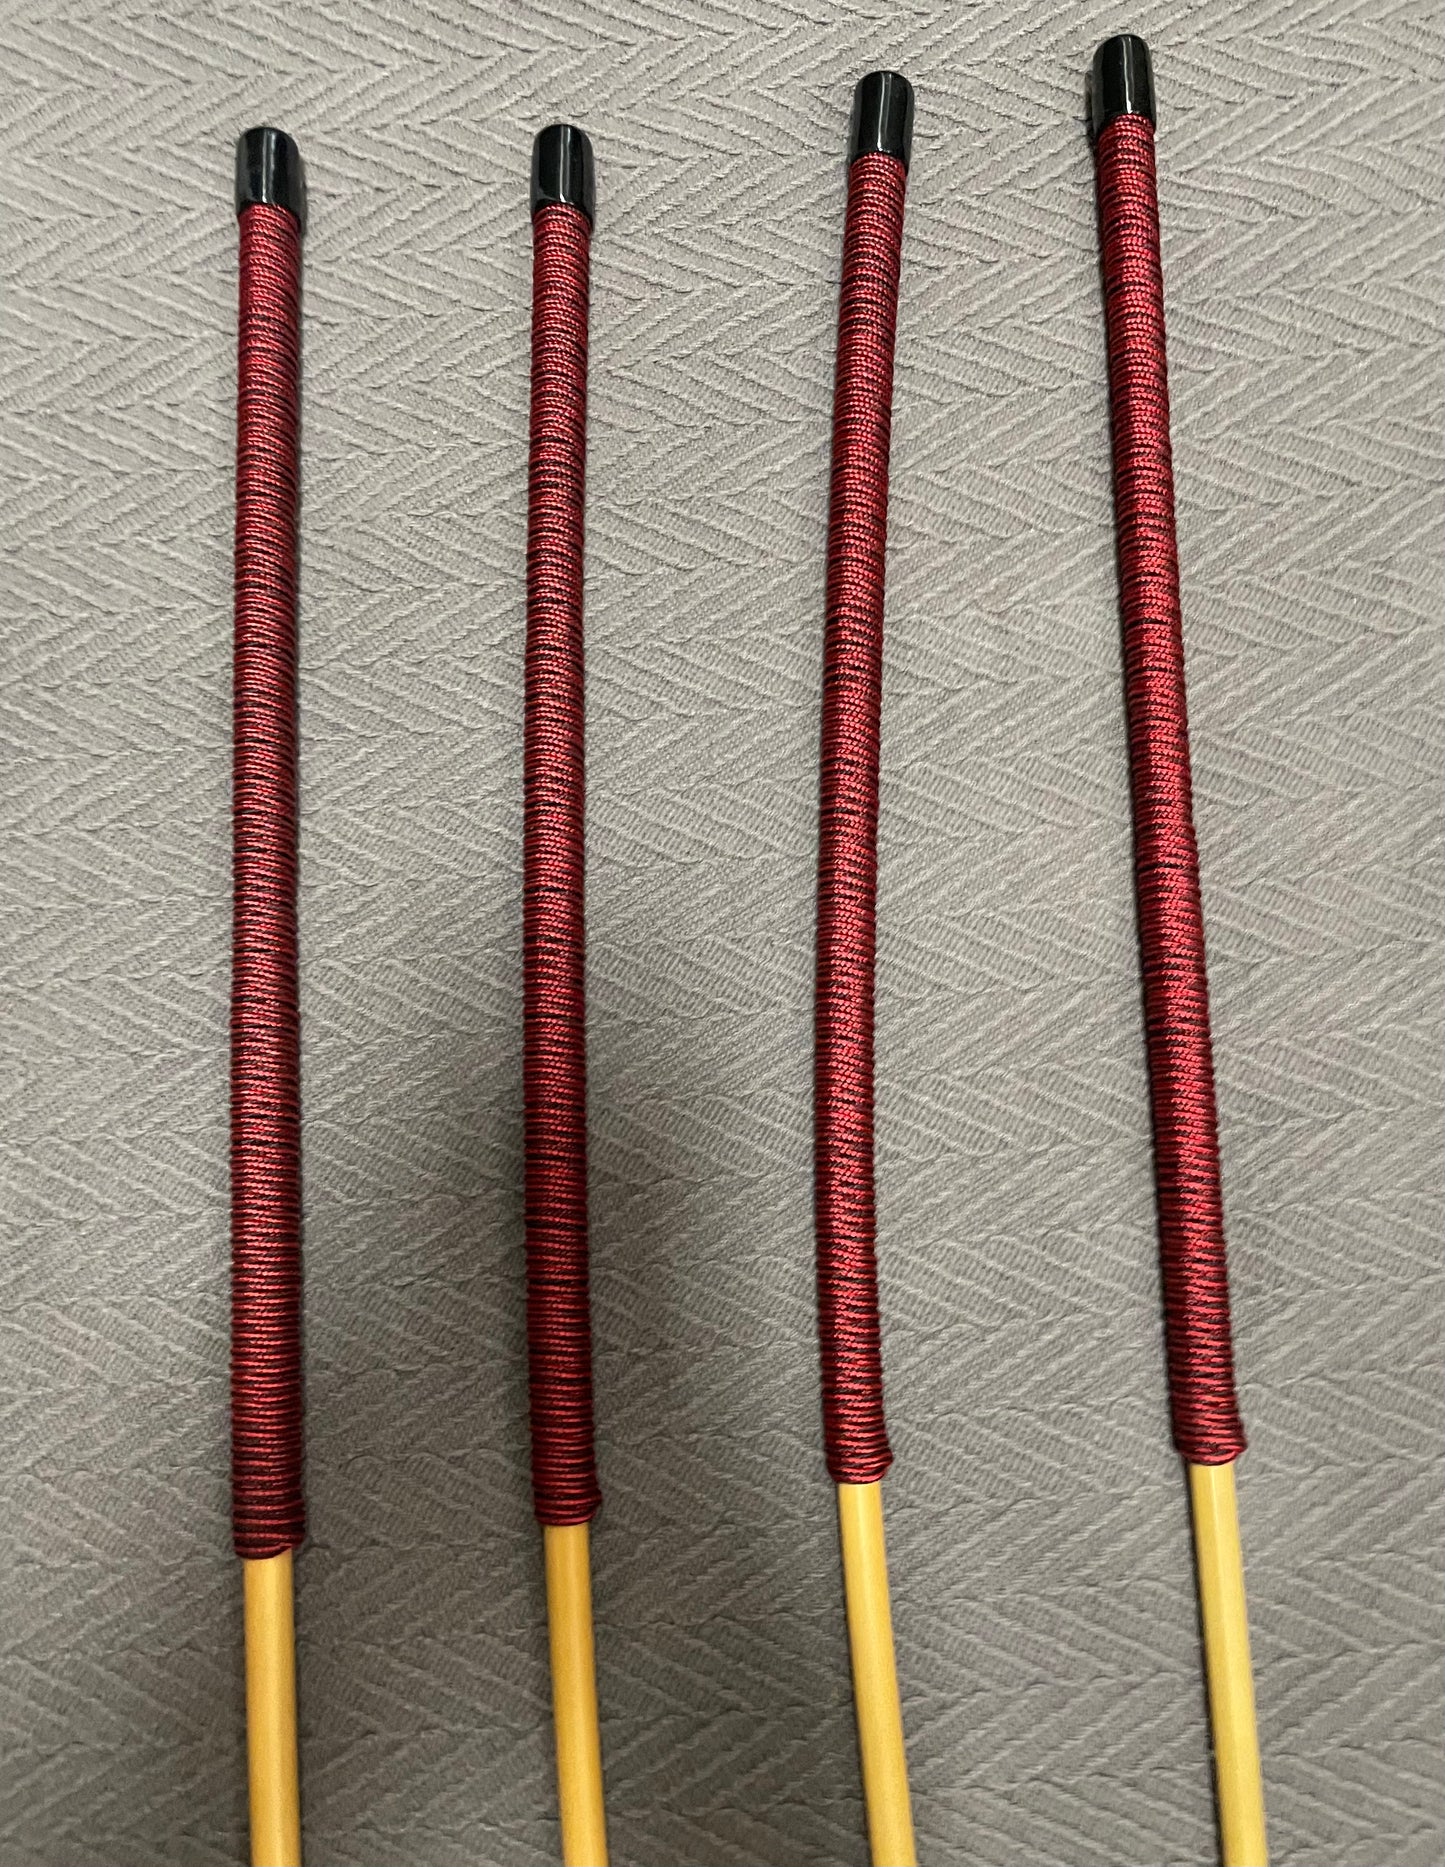 Pro Disciplinarian BDSM Toychest Essentials  - Set of 4 Classic Dragon Rattan Punishment Canes -  98 - 102 cms L - 14" BLACK / RED Kangaroo Leather Handles